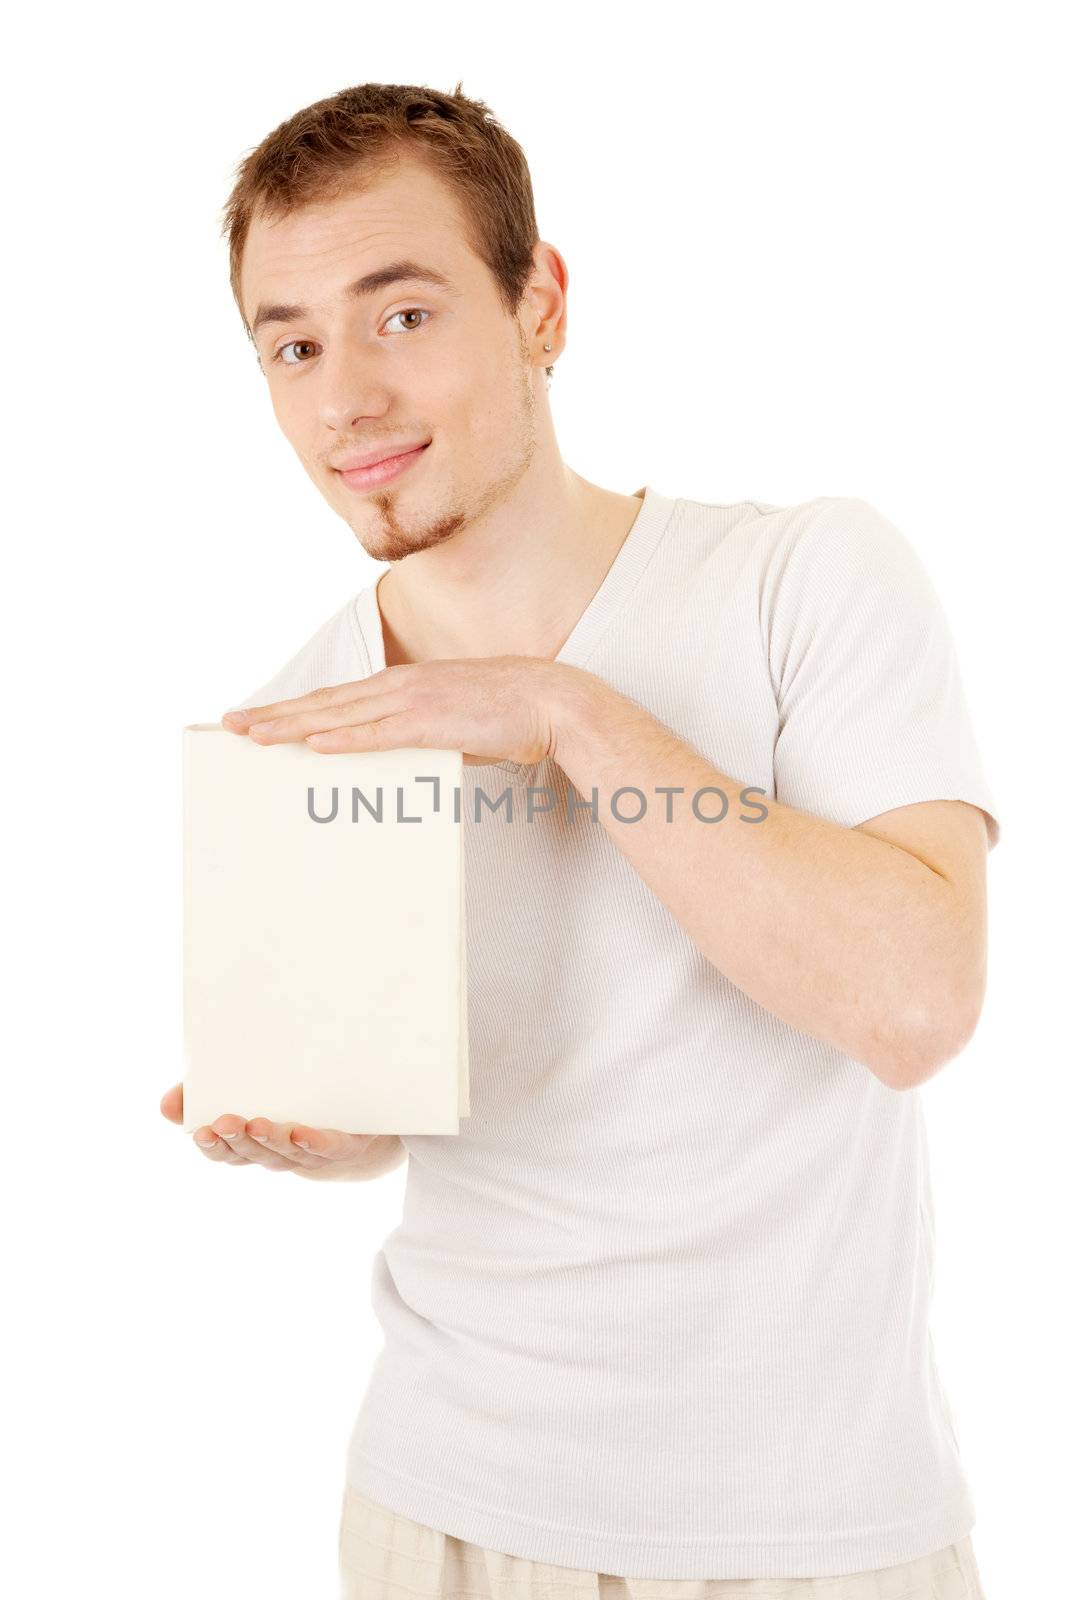 Handsome young man demonstrates a book by two hands. Image include clipping path for the book.